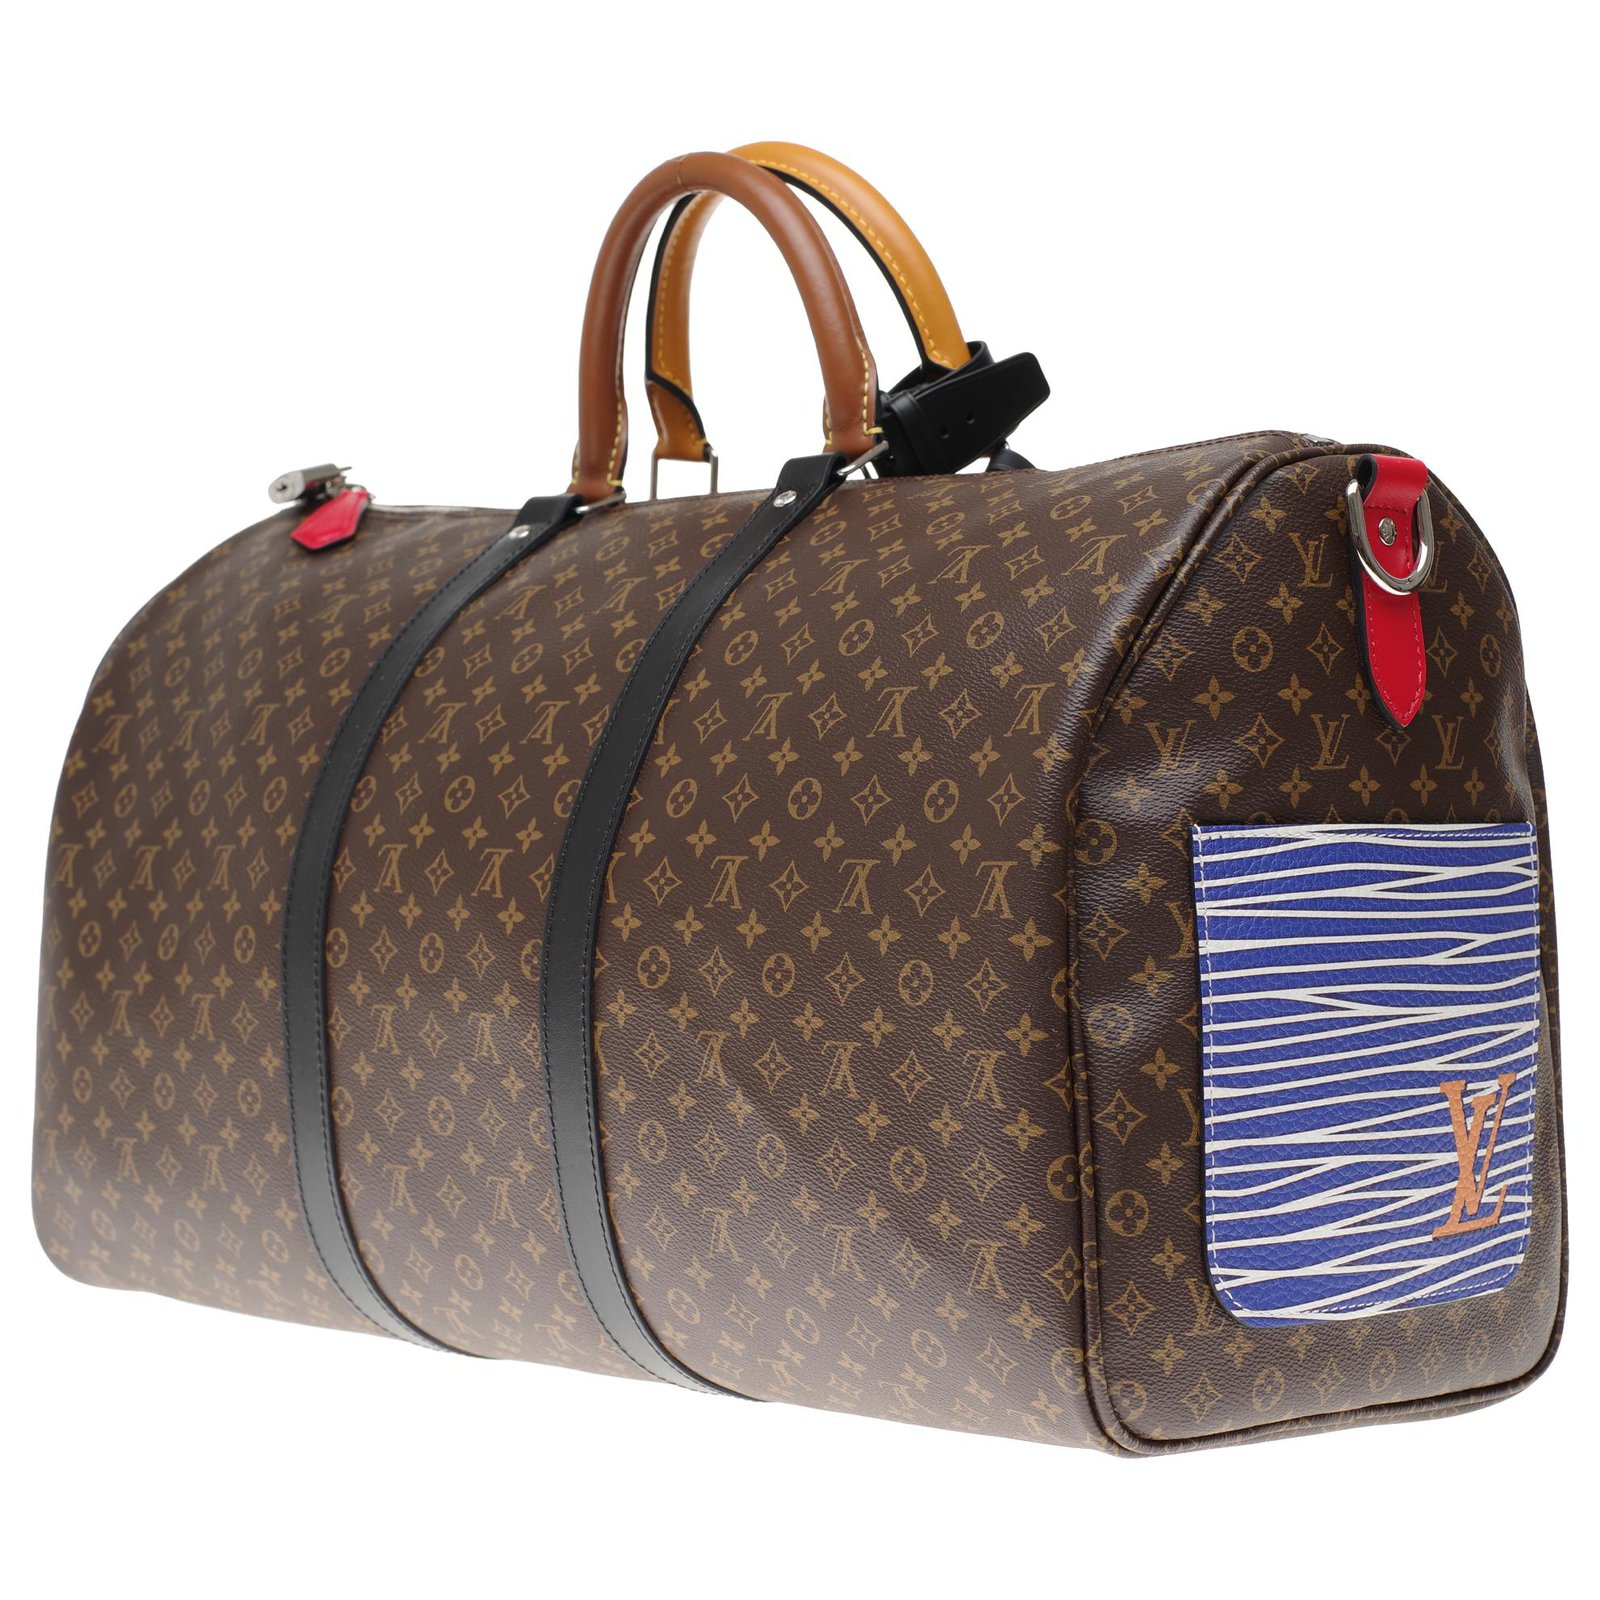 sac voyage homme luxe pas cher